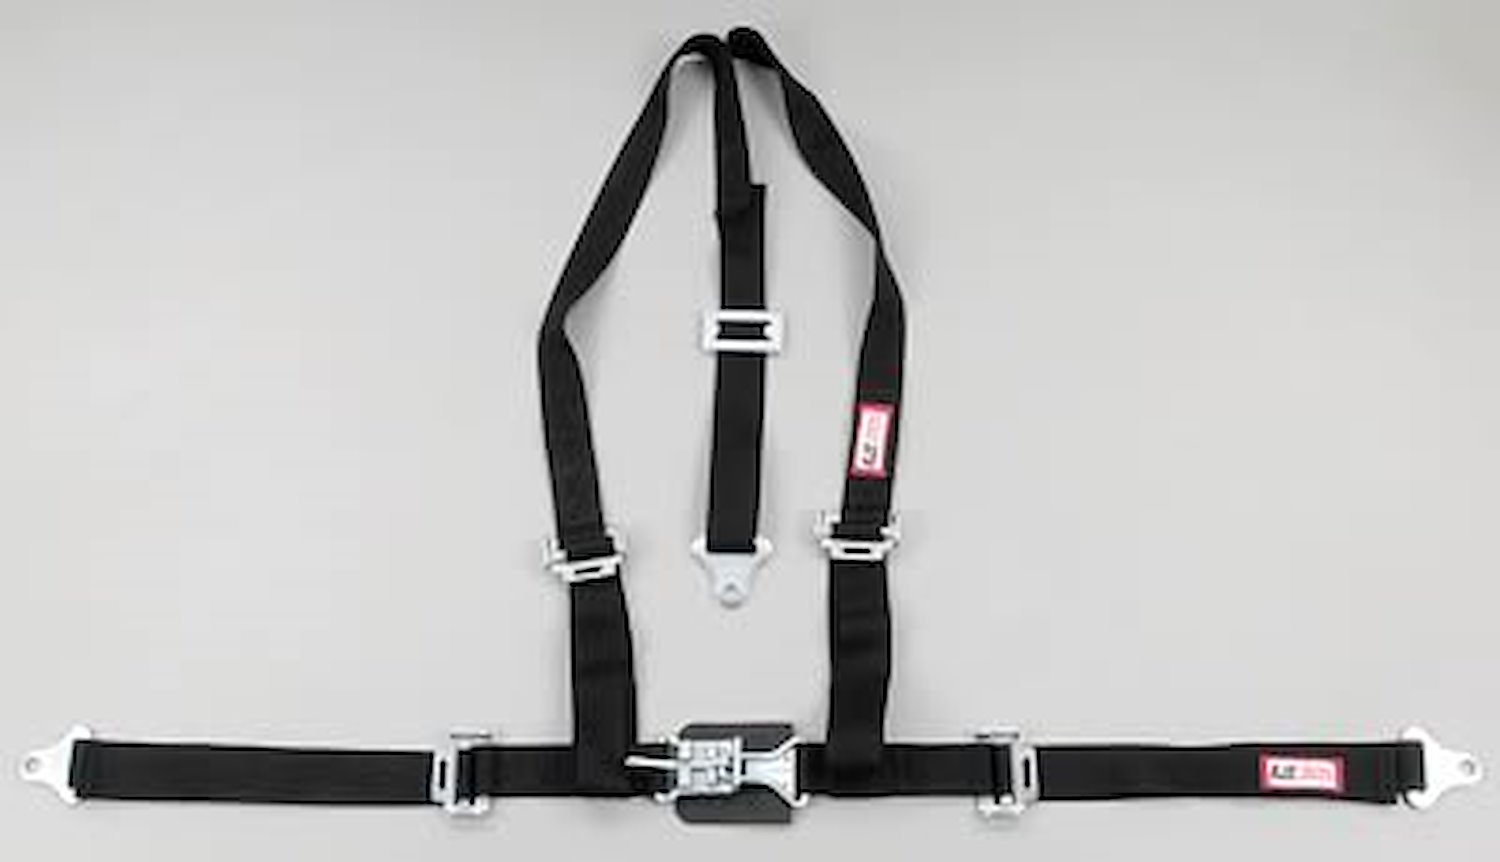 NON-SFI L&L HARNESS 3 PULL UP Lap Belt SEWN IN 2 S.H. Individual FLOOR Mount ALL WRAP ENDS BLACK